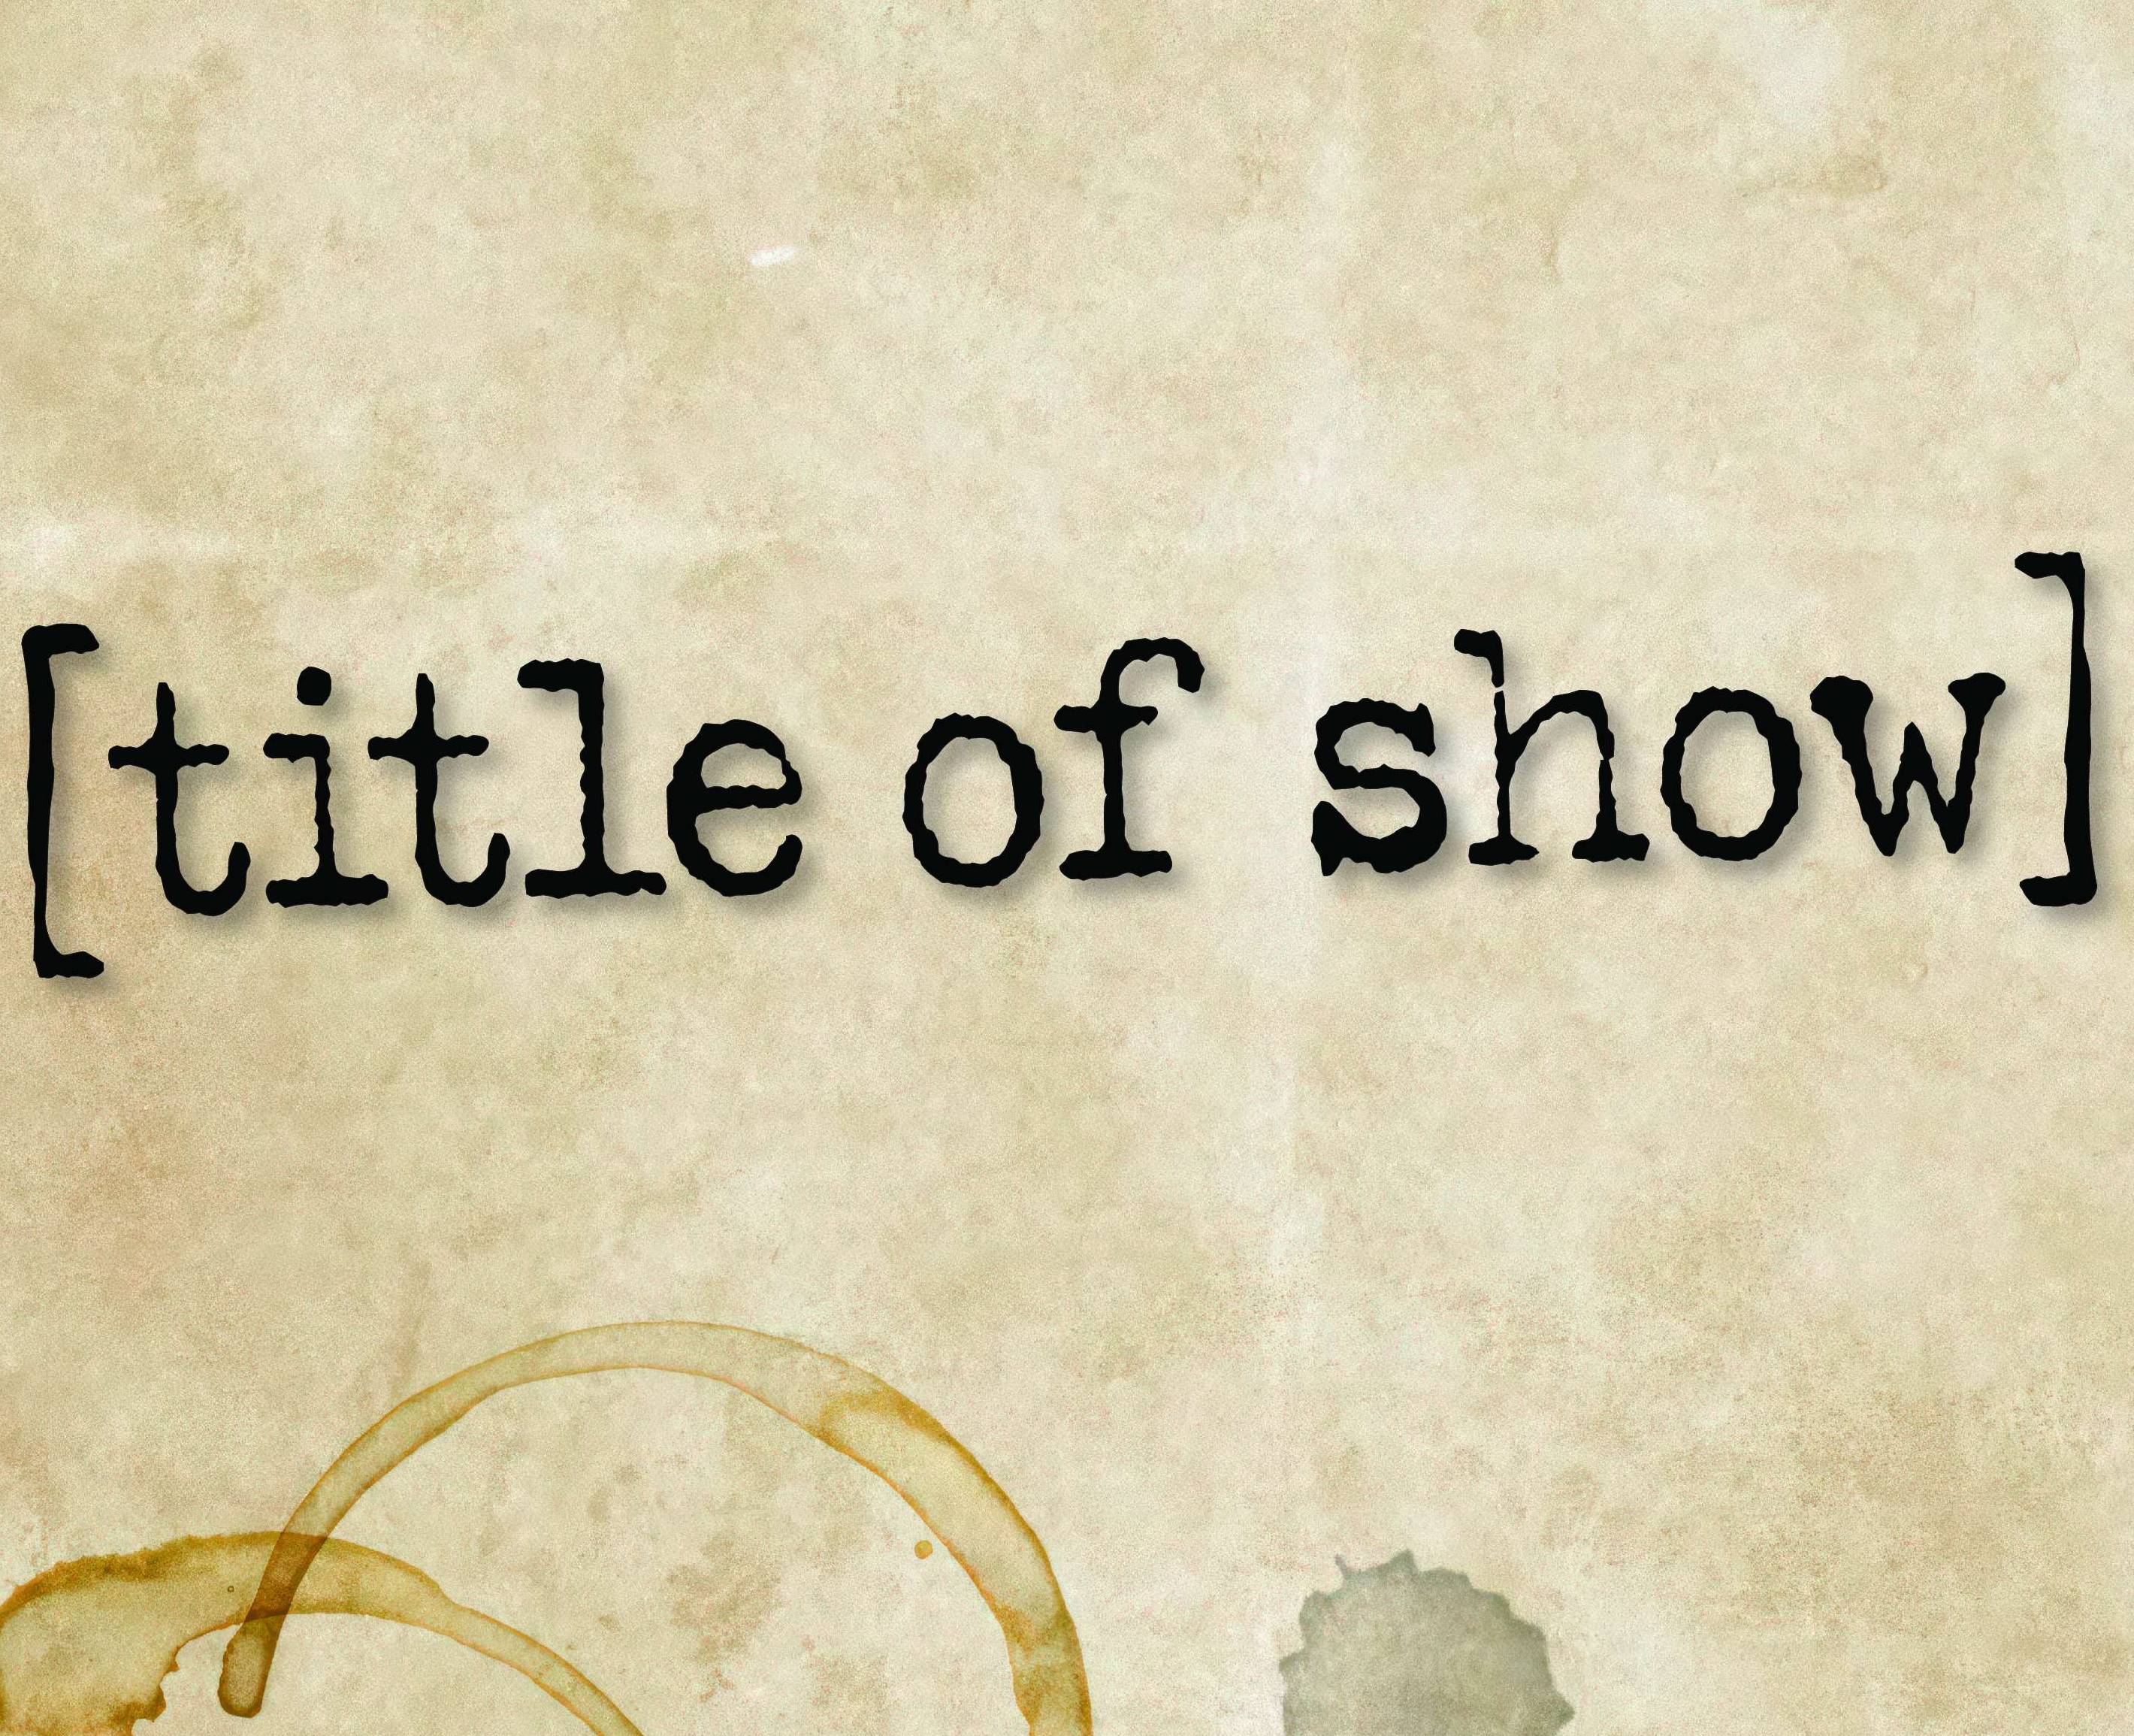 TITLE-OF-SHOW-logo-15x15 compressed - Copy